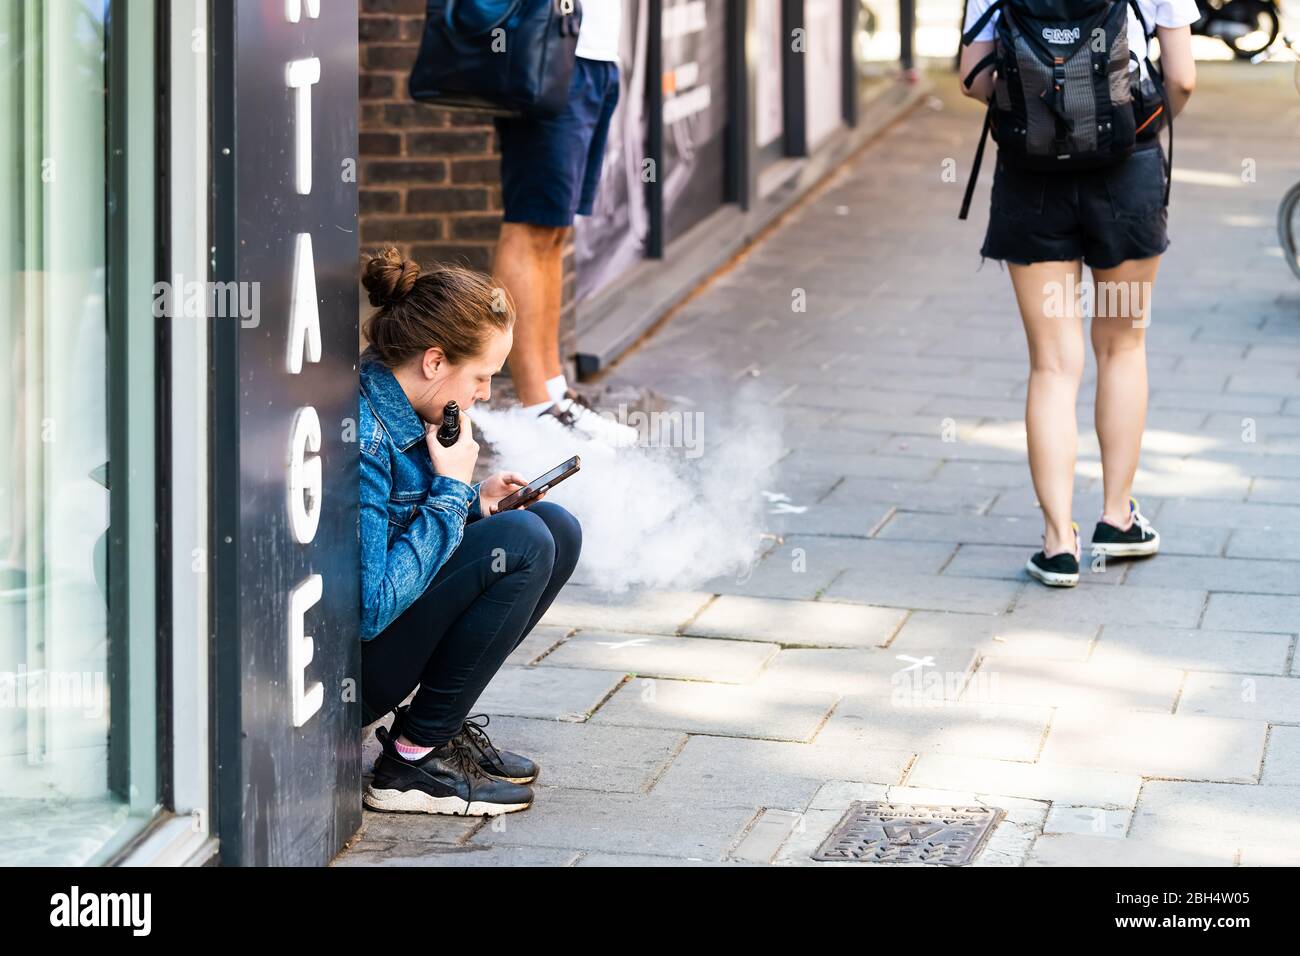 London, UK - June 26, 2018: People woman sitting on sidewalk street road in Covent Garden downtown city vaping with ecigarette vapor Stock Photo